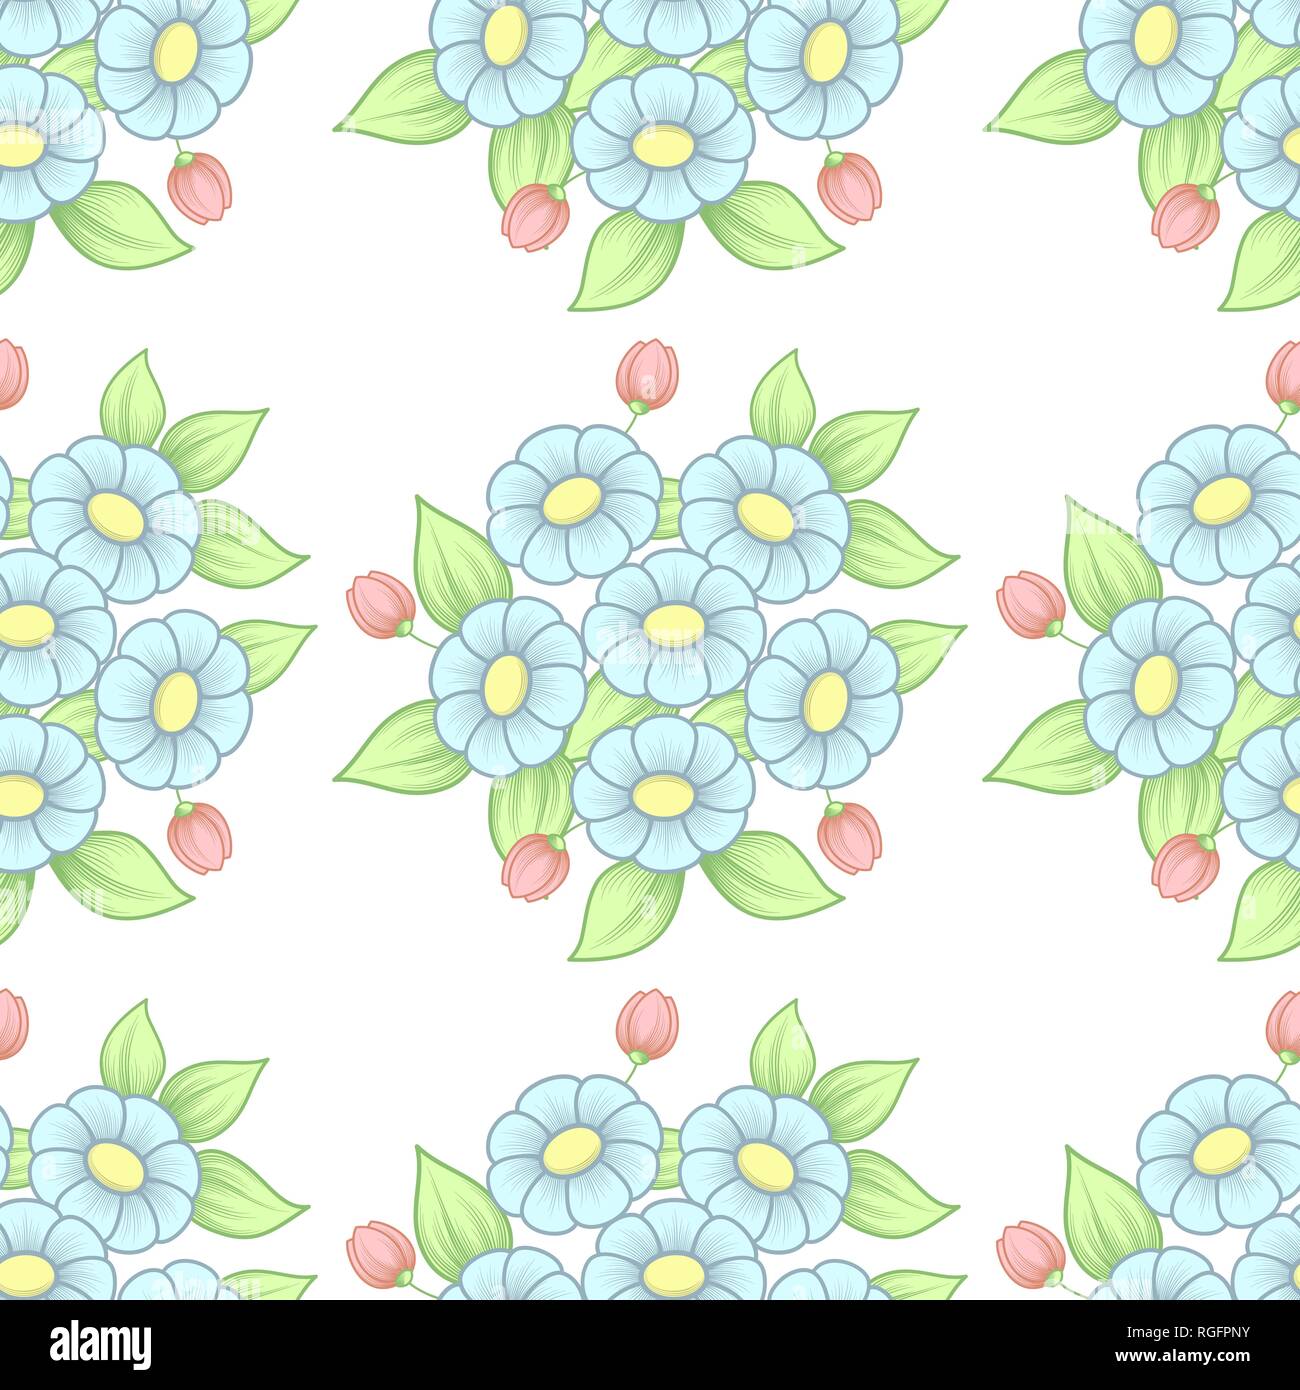 Seamless white background with pastel color flower daisy bouquets Stock Vector